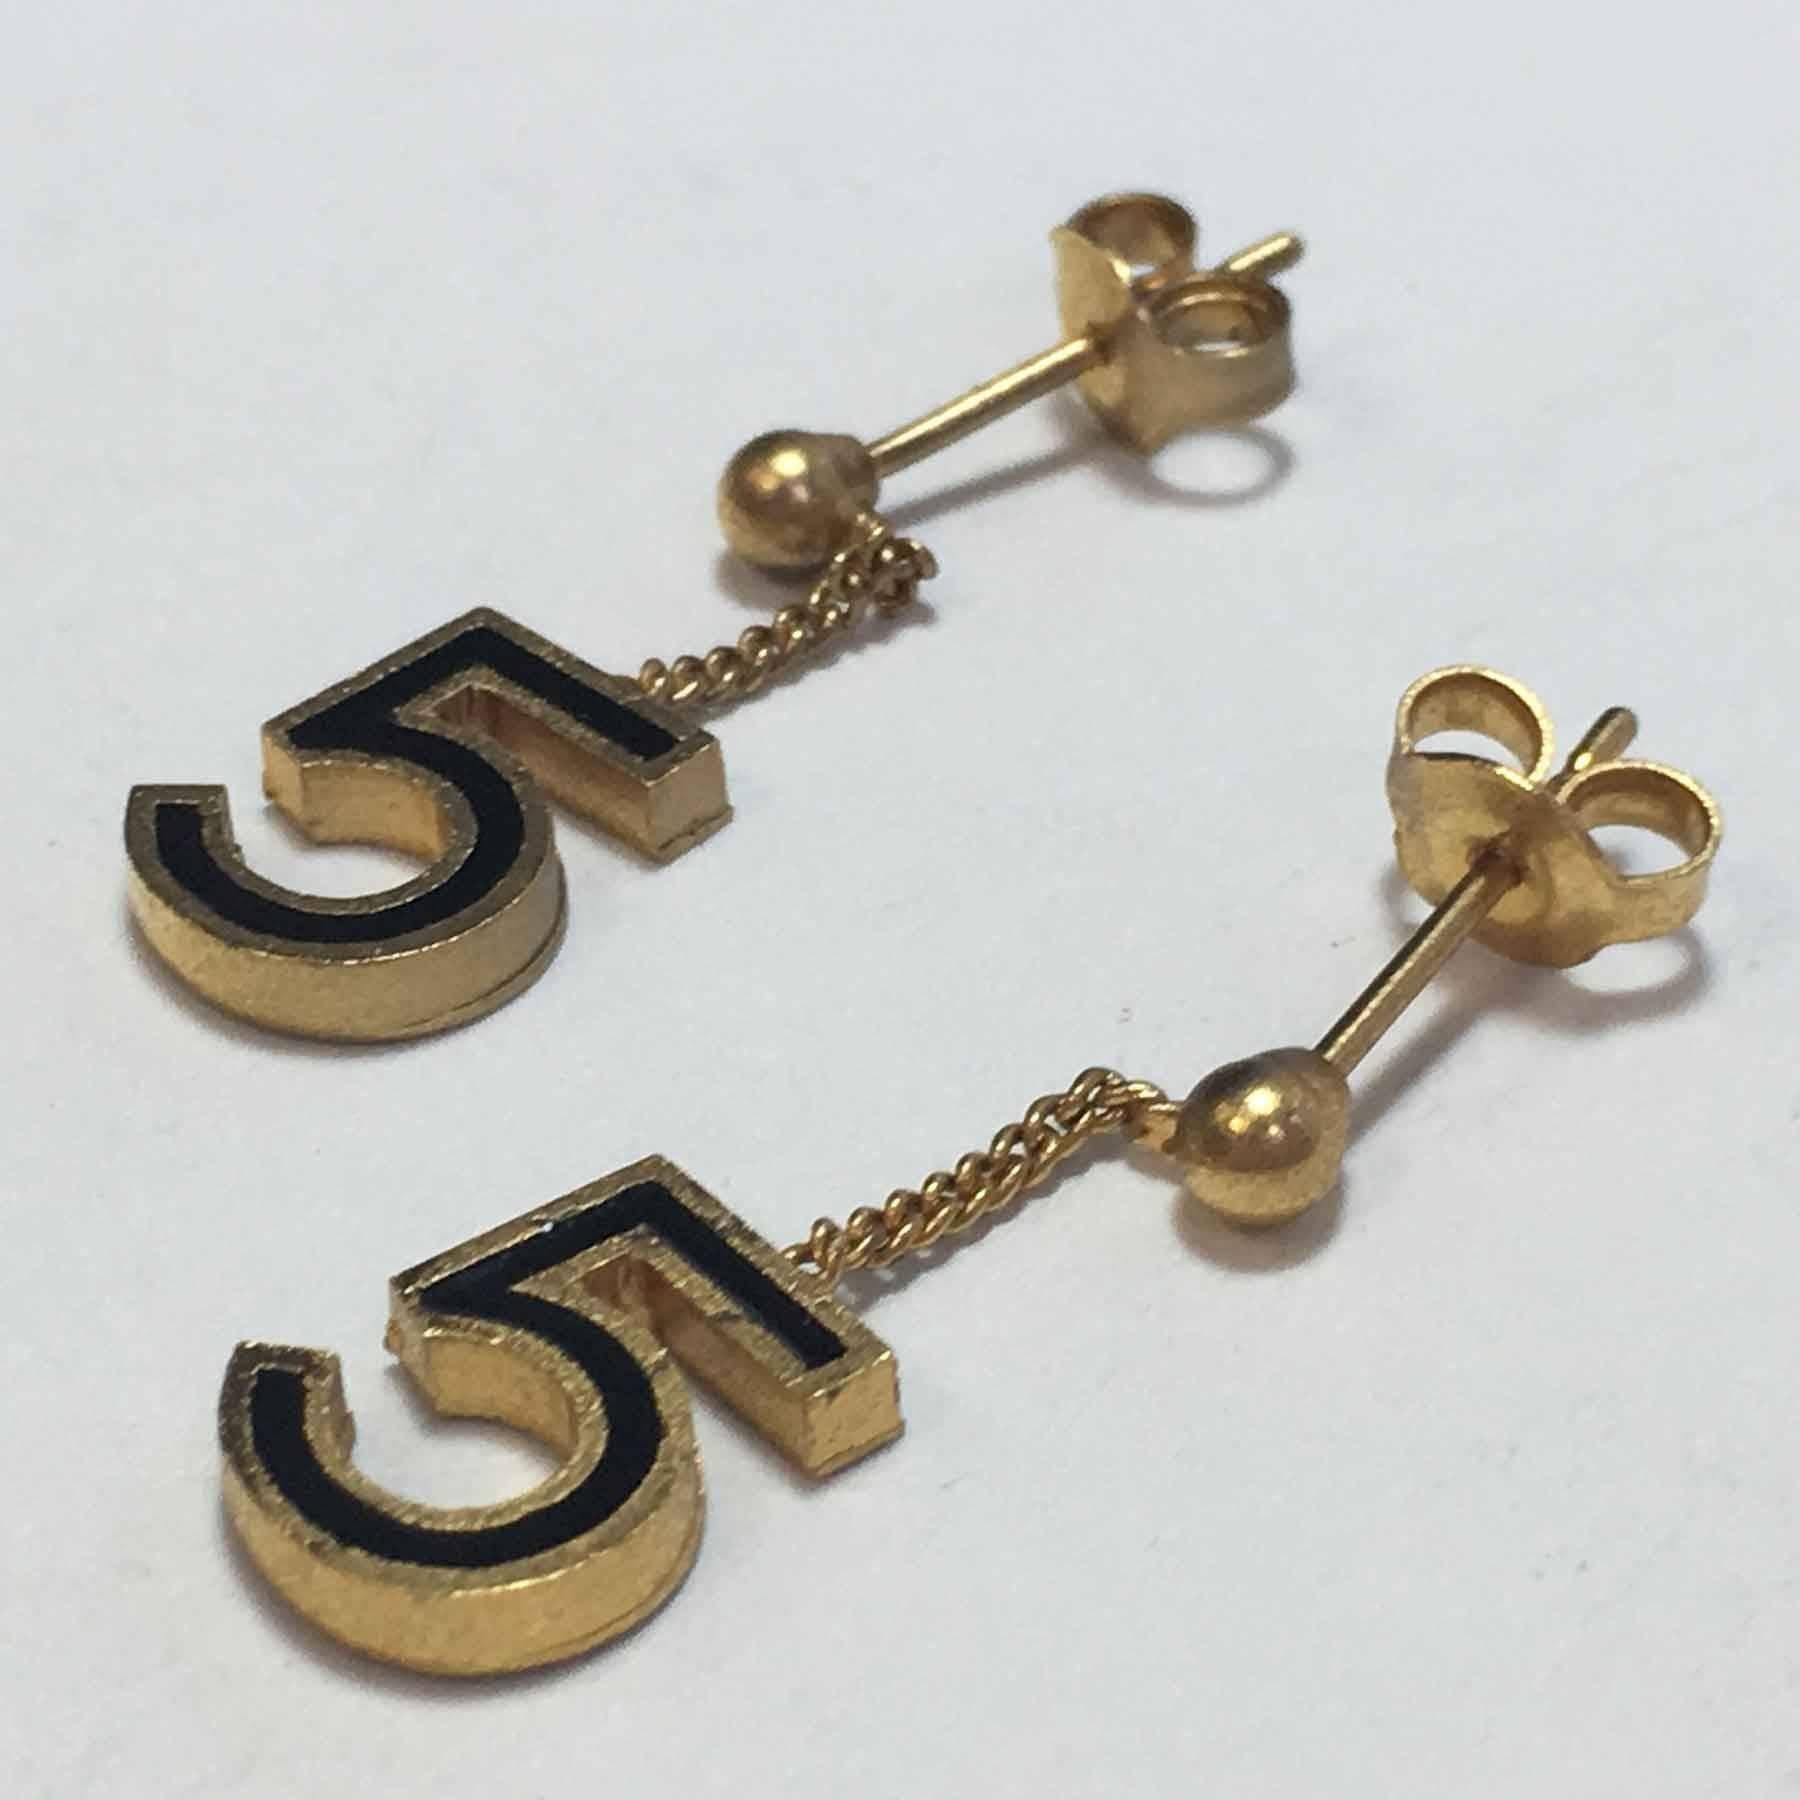 Chanel number 5 ear studs in gilt metal and black resin.

Delivered in a Valois Vintage Paris pouch.